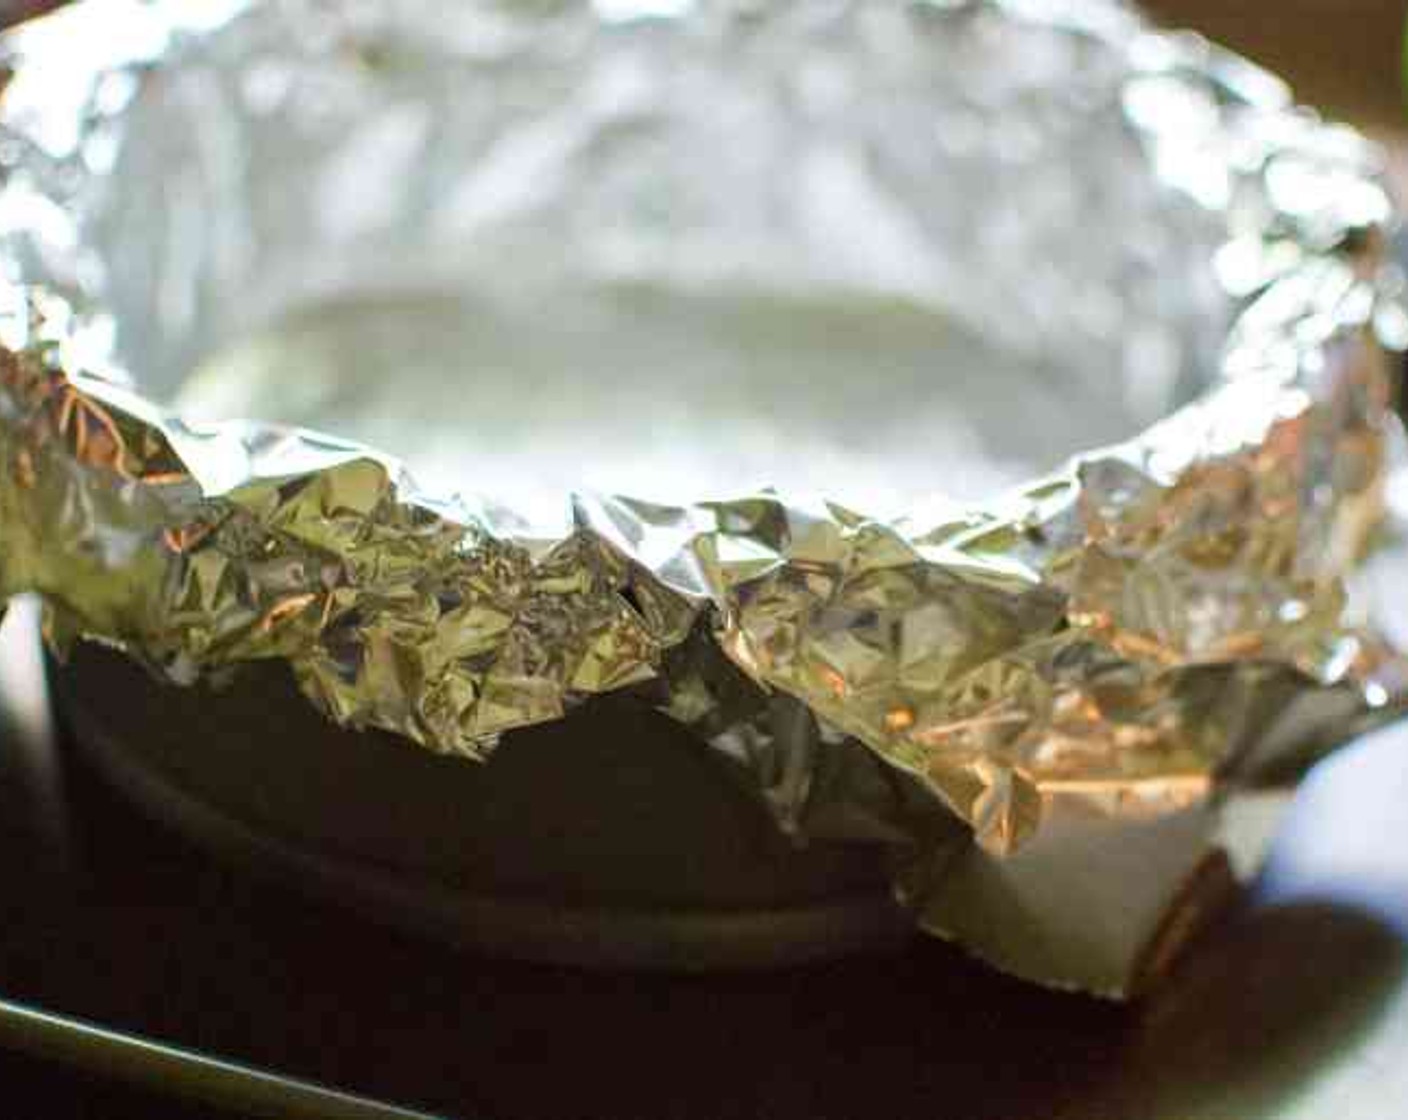 step 6 Preheat the oven to 400 degrees F (200 degrees C). Place the springform pan on a baking sheet. Line the pastry shell with a double thickness of aluminum foil long enough to overhang the sides.